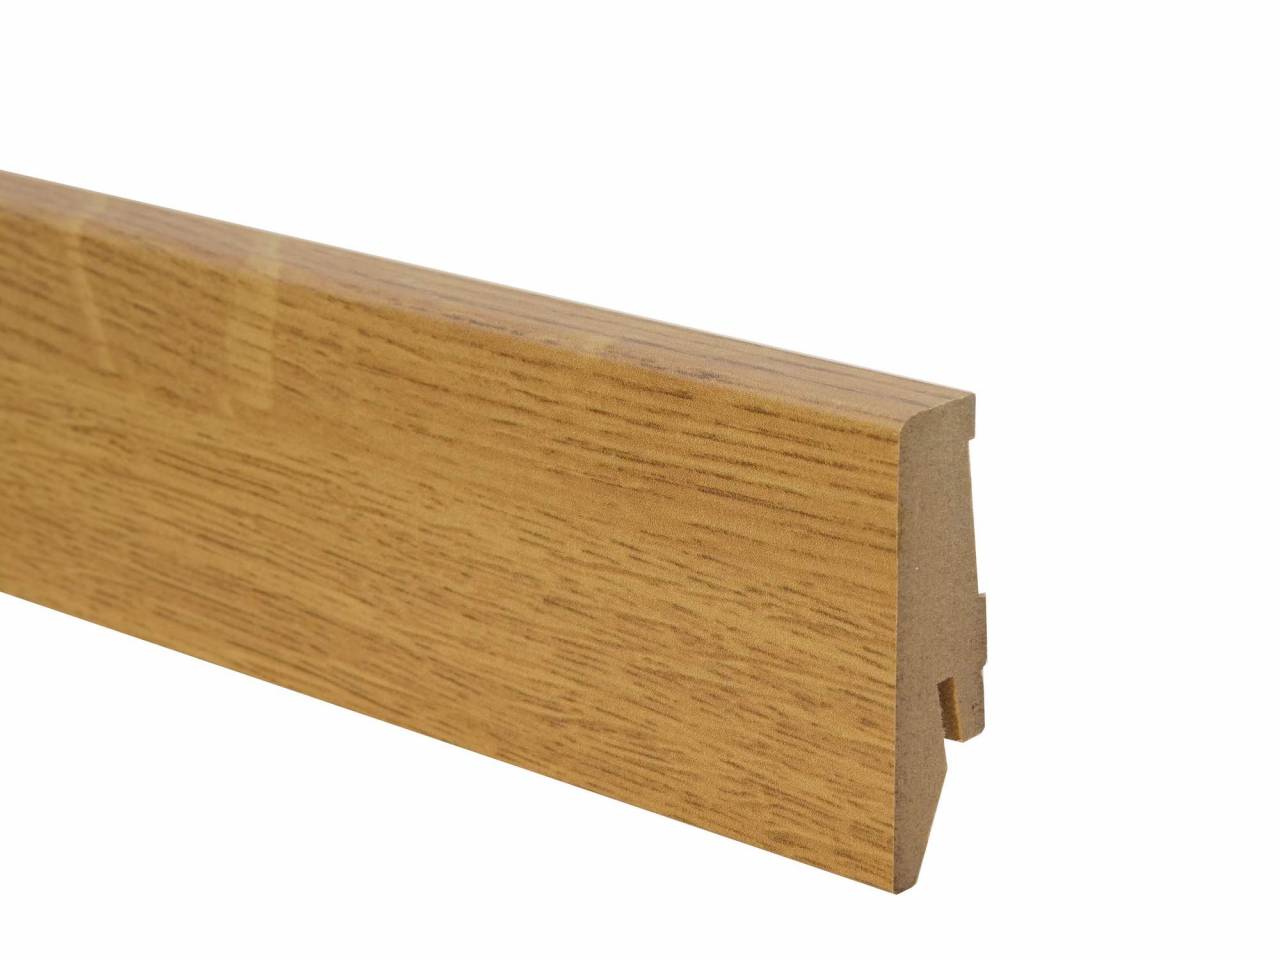 MDF wood floor sill Z078 with cable channel and height 58 mm. Suitable for beige laminate flooring.